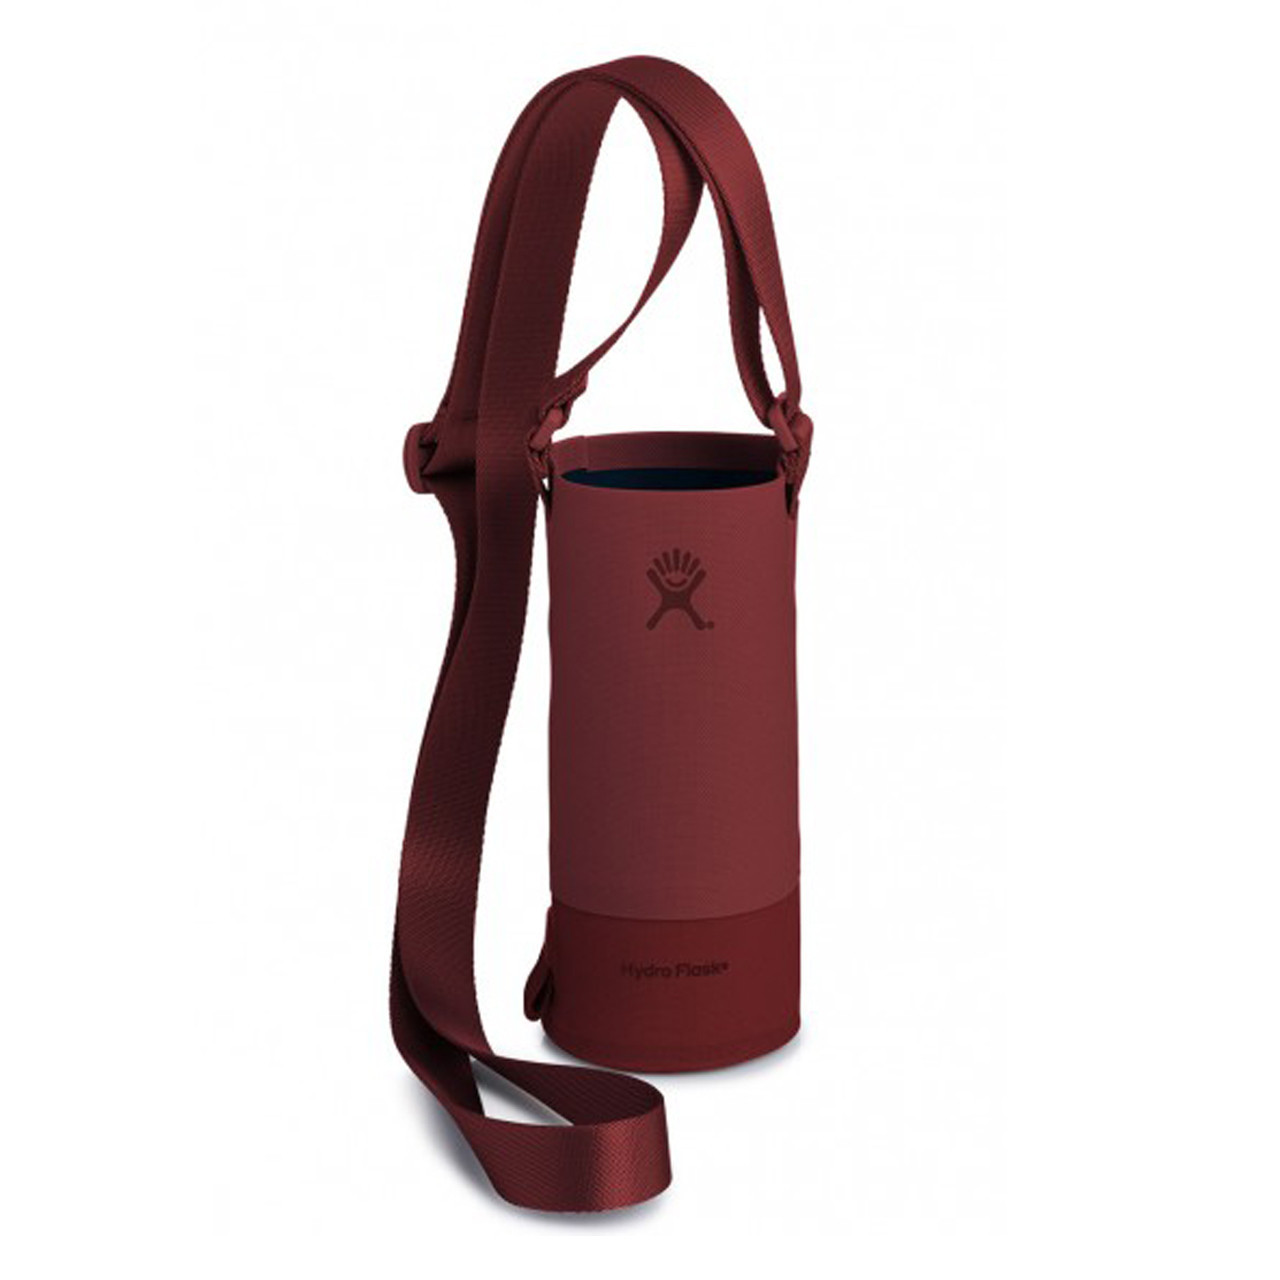 Hydro Flask Small Tag Along Bottle Sling - Brick